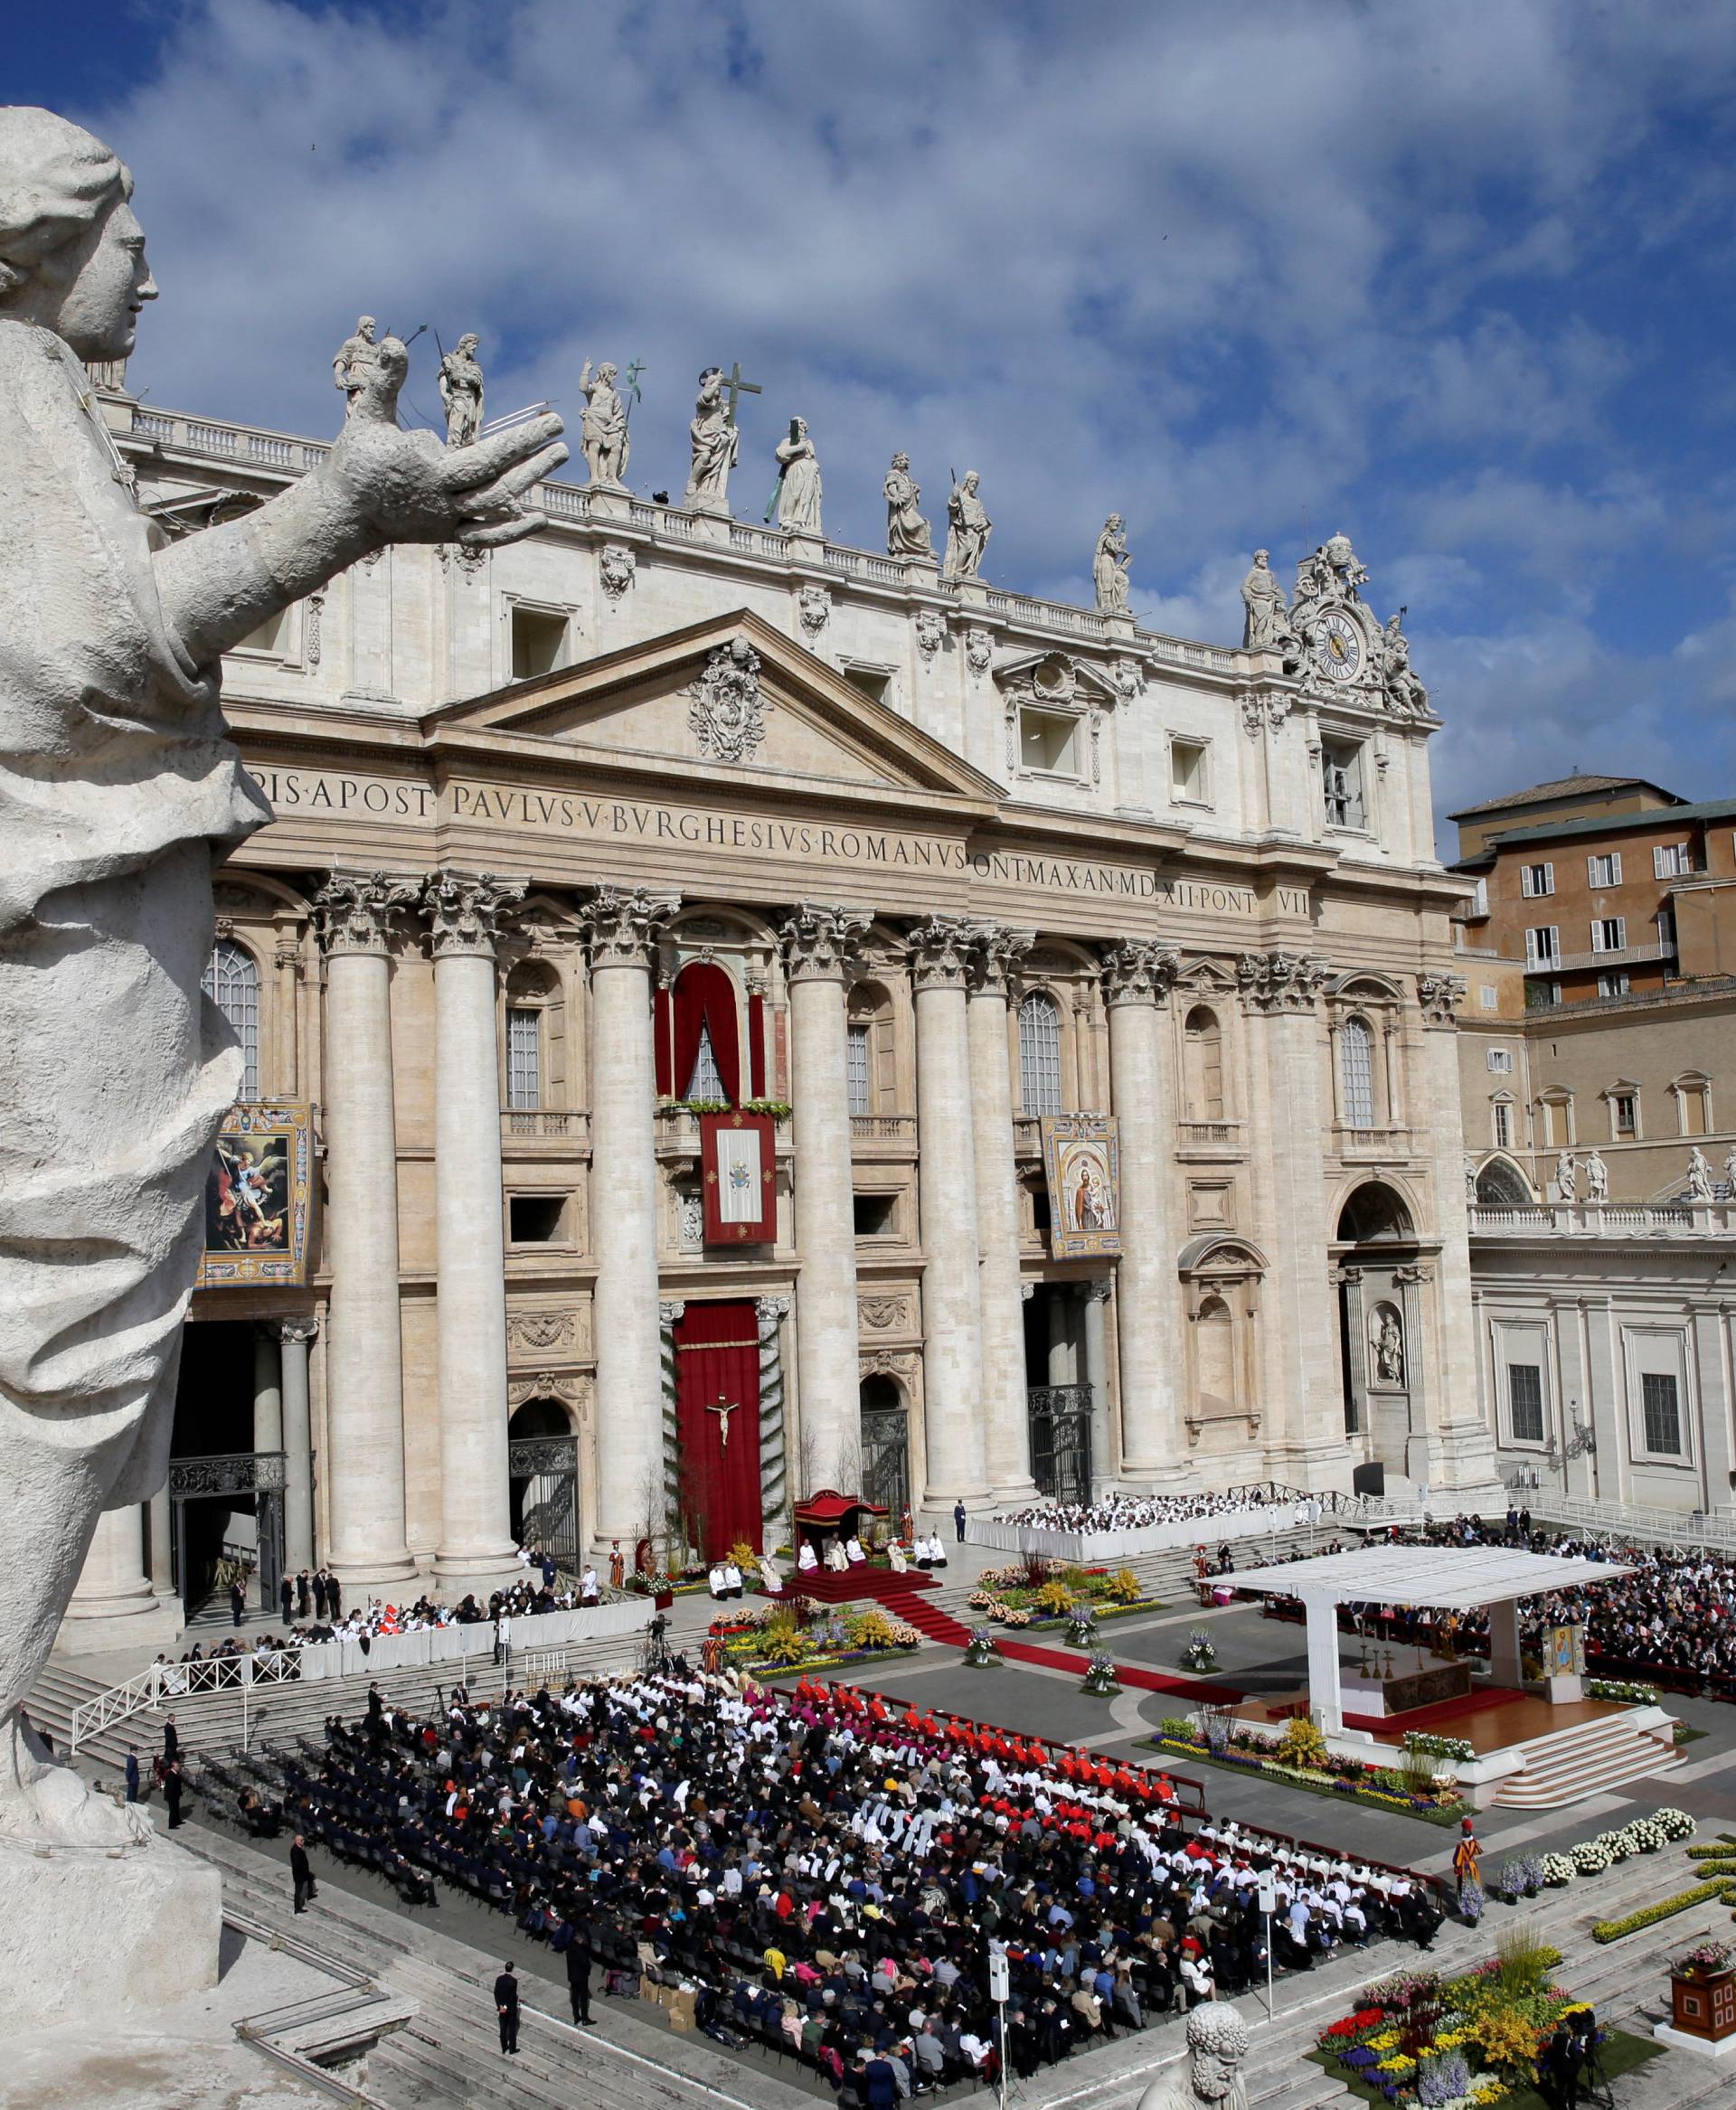 Pope Francis leads the Easter Mass at St. Peter's Square at the Vatican